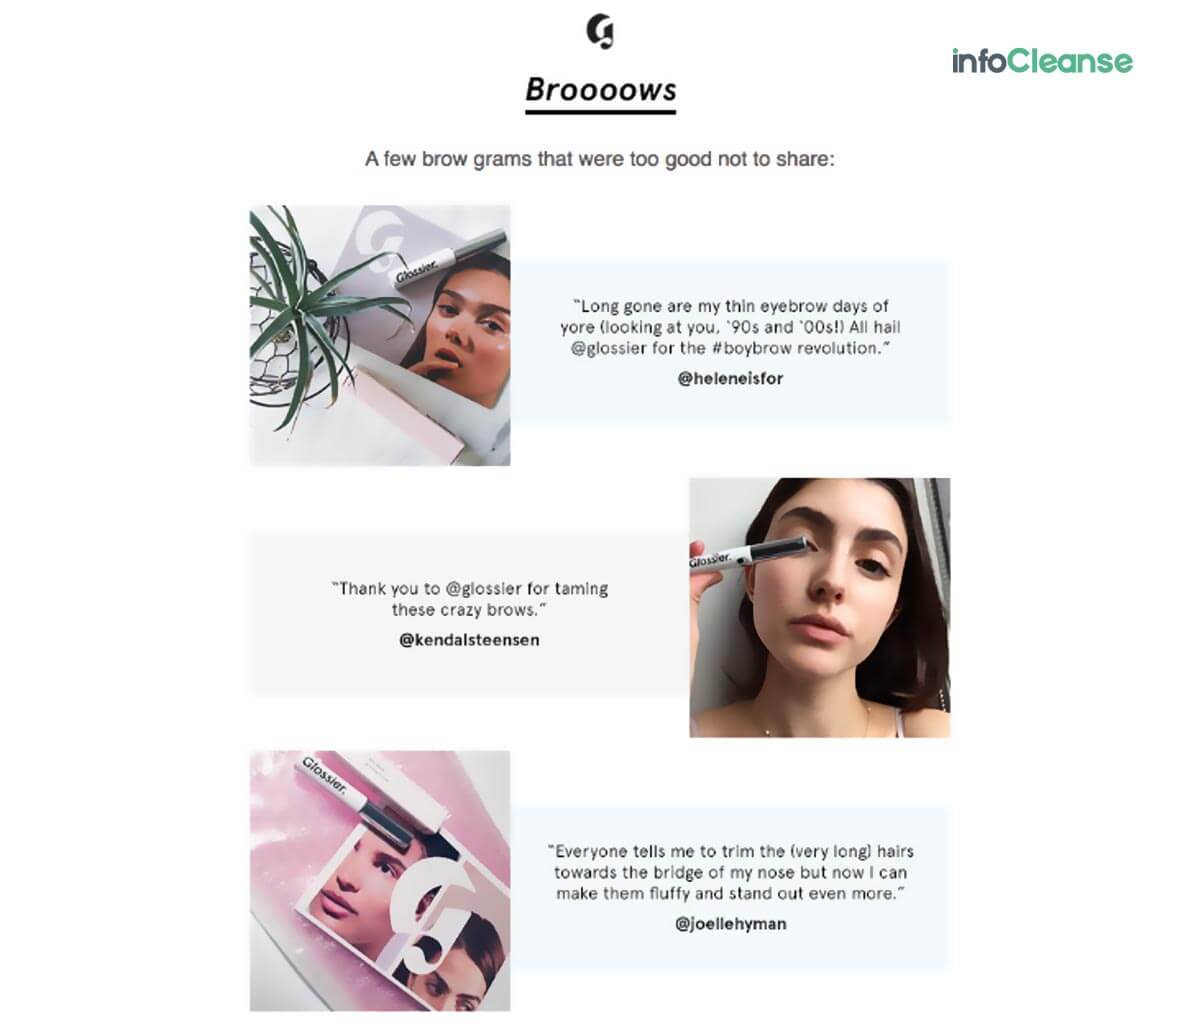 User-Generated Content - InfoCleanse